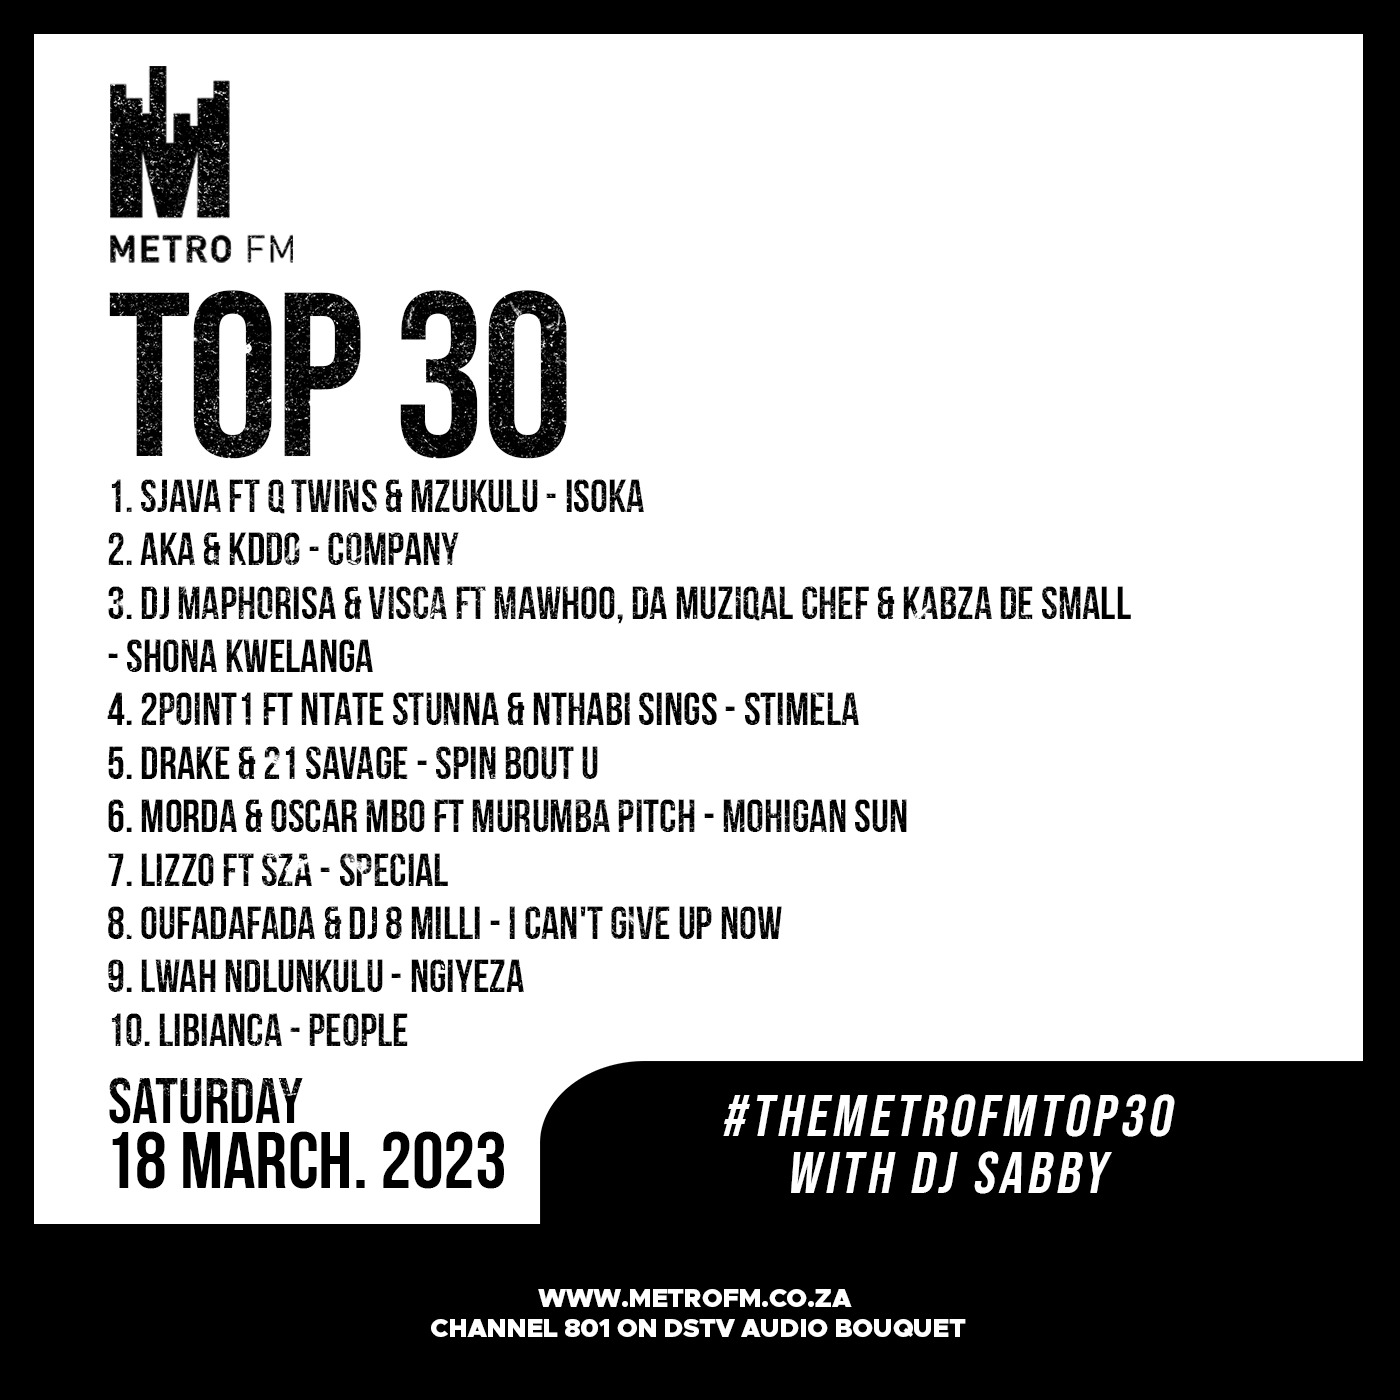 METROFM SABC on X: "These are your TOP 10 songs this week on #METROFMTop30  https://t.co/ucHNeo8MzG" / X